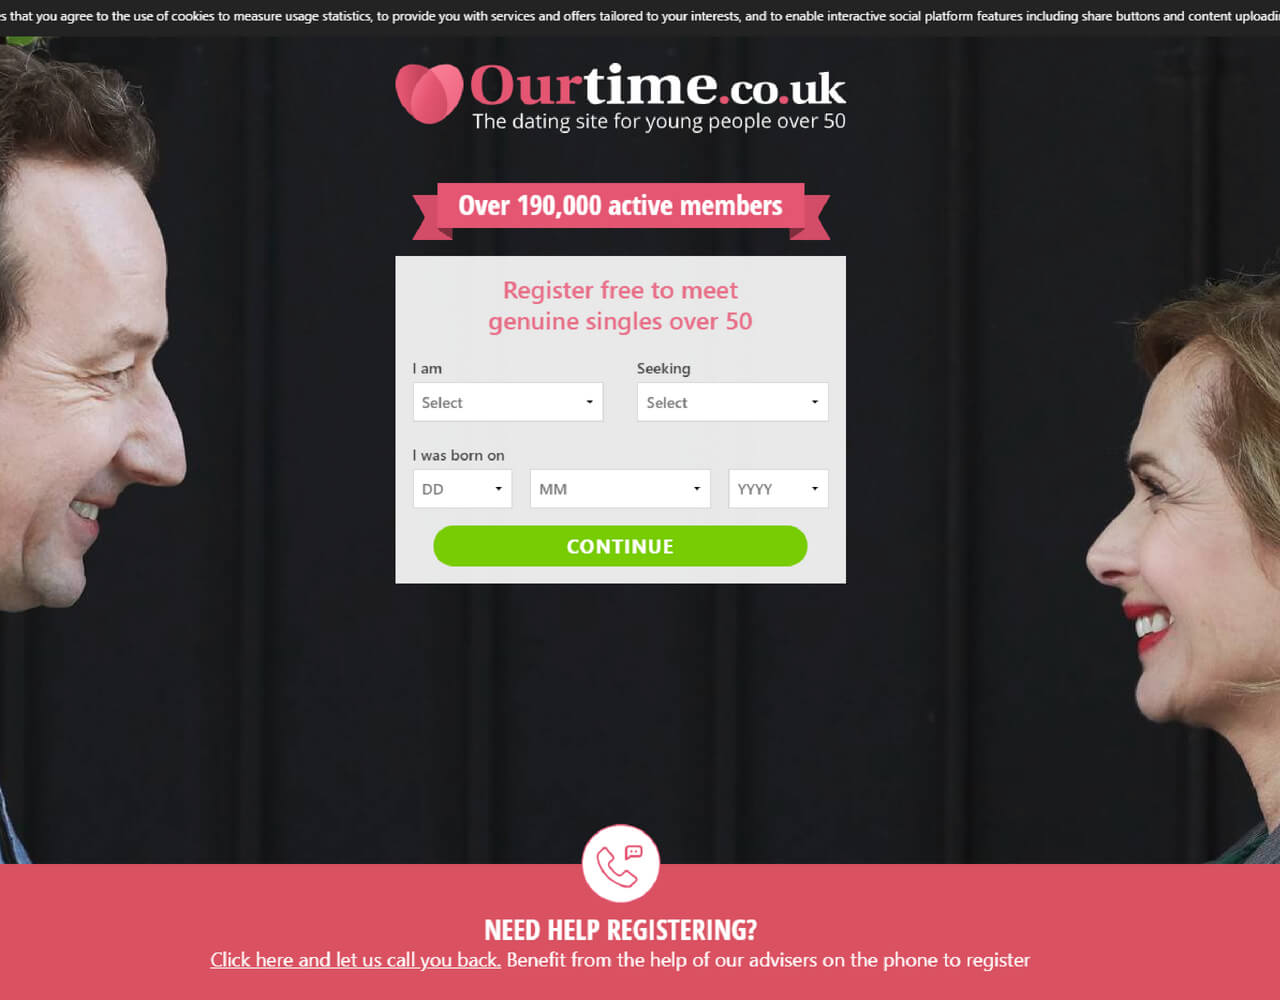 best dating website for over 50 uktypical online dating profile questions